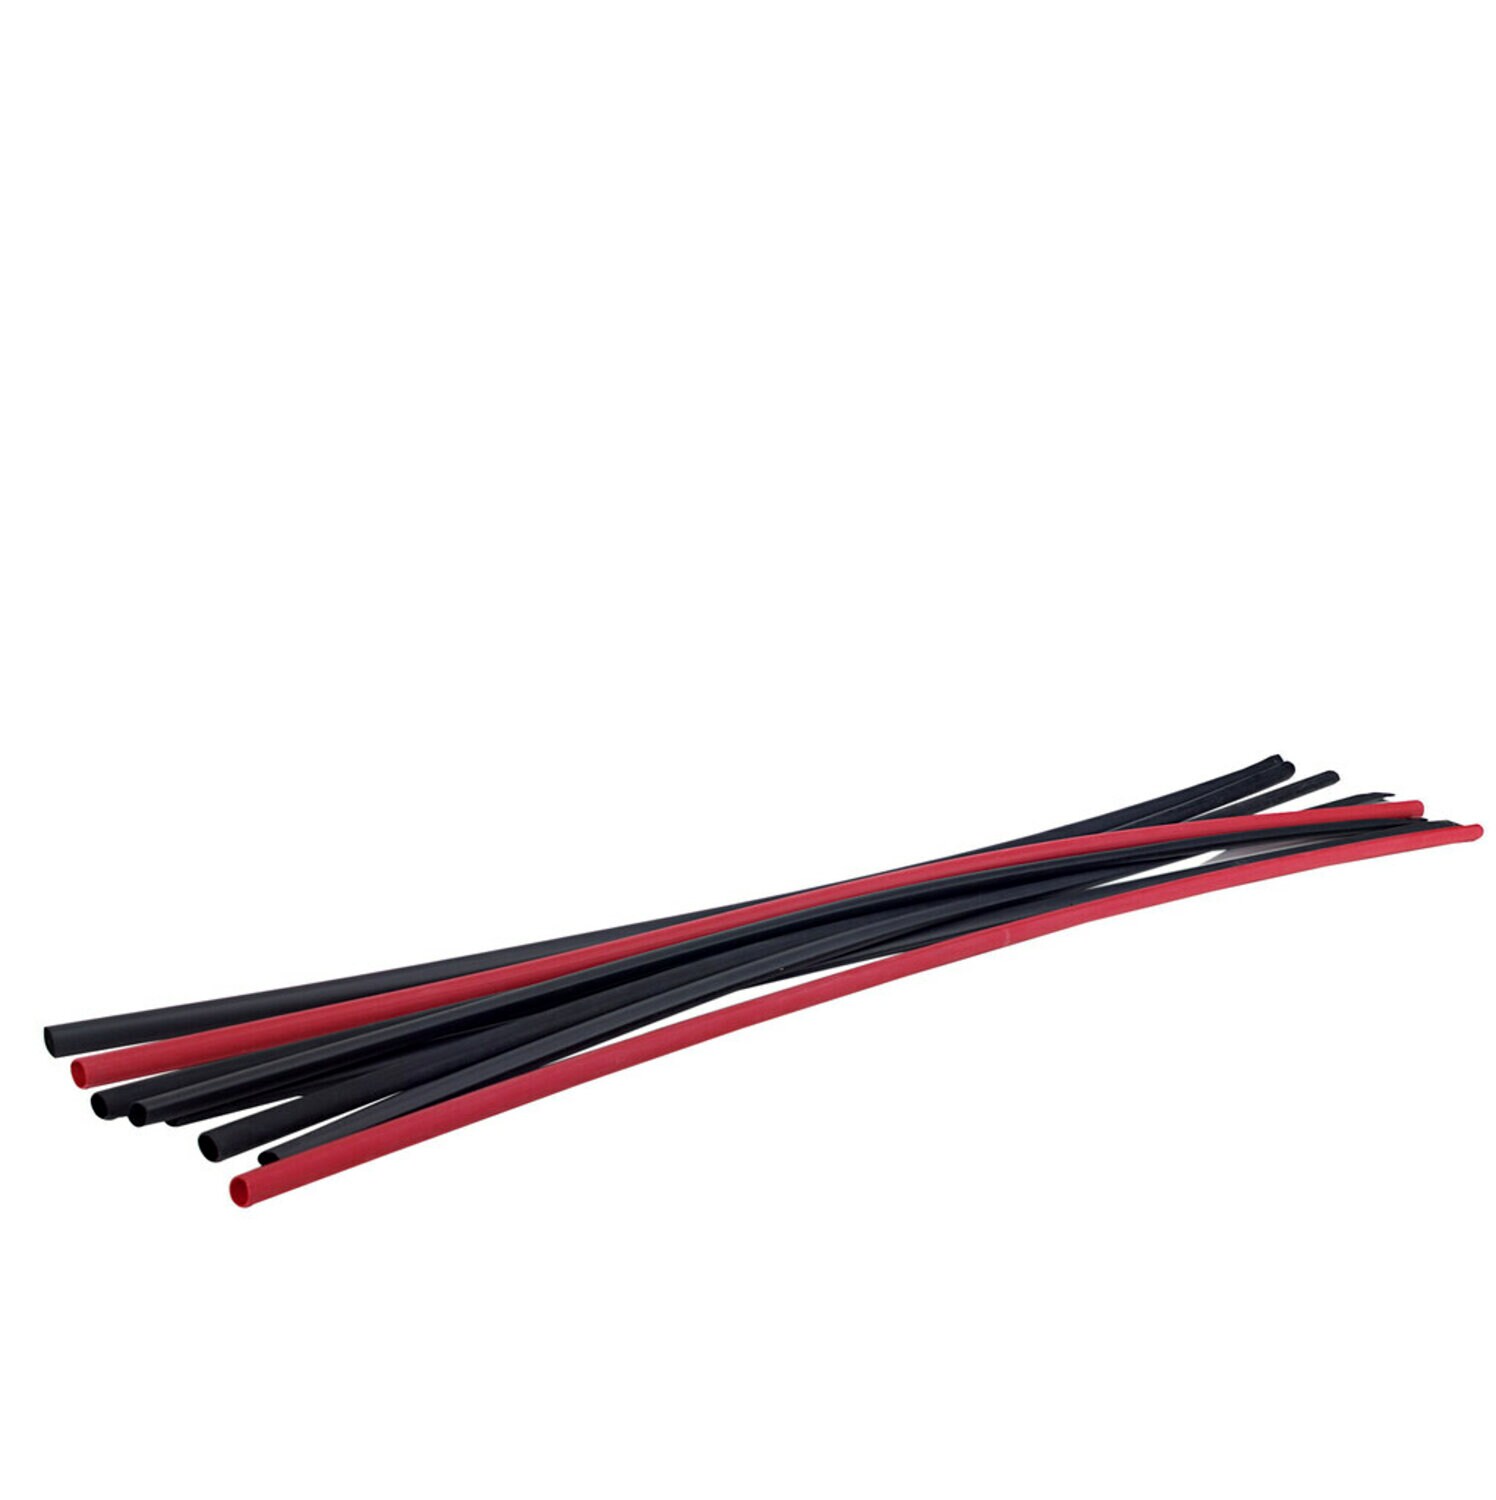 7000133570 - 3M Heat Shrink Thin-Wall Tubing FP-301-1-48"-Red-Hdr-5 Pcs, 48 in
Length sticks with header label, 5 pieces/case